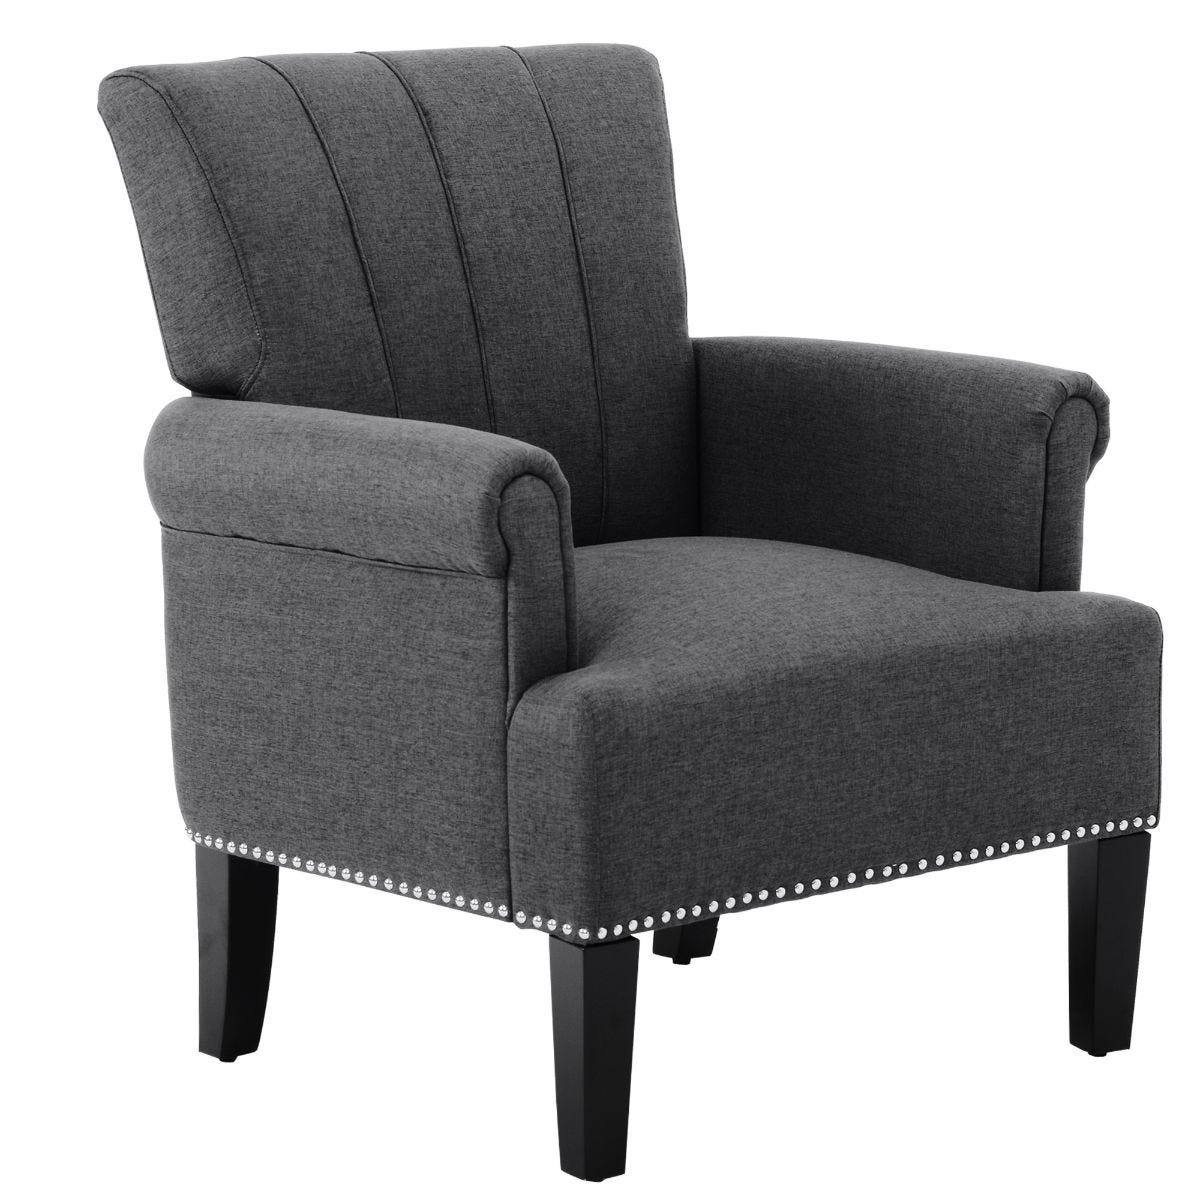 Homcom Wing Back Armchair With Upholstered Seat Wood Legs Dark Grey